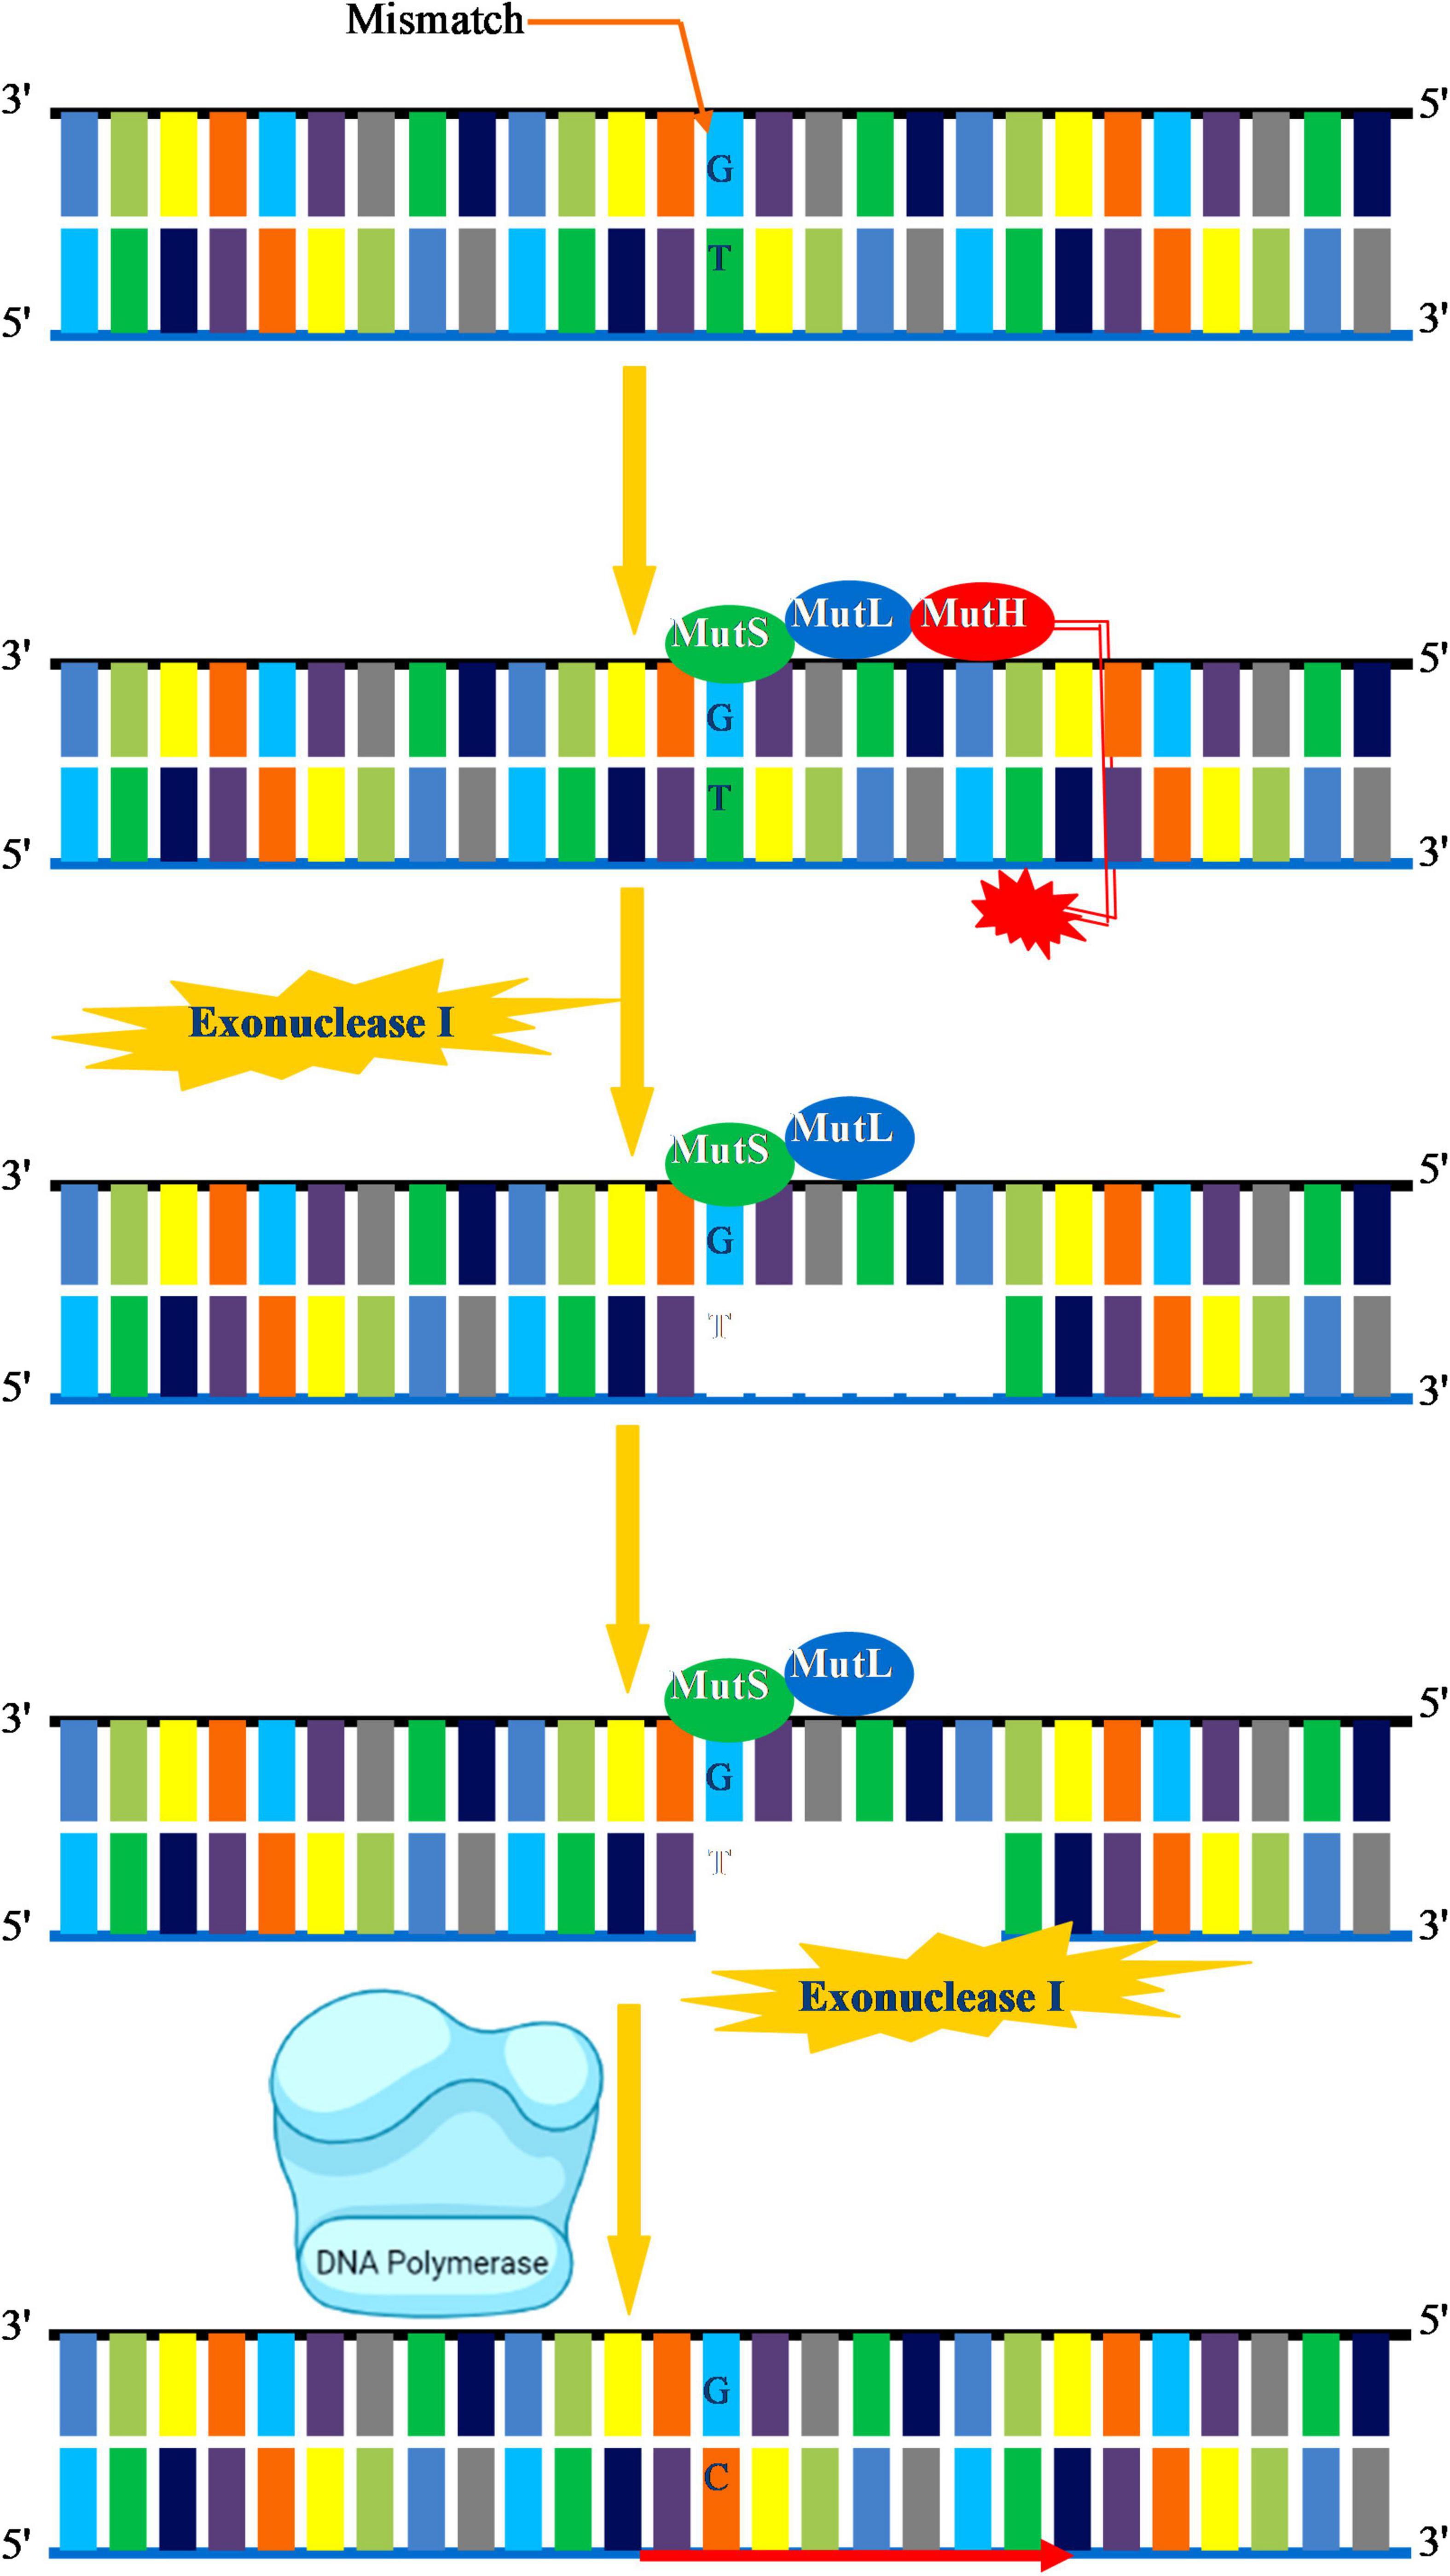 Frontiers  Mechanisms of Genome Maintenance in Plants: Playing It